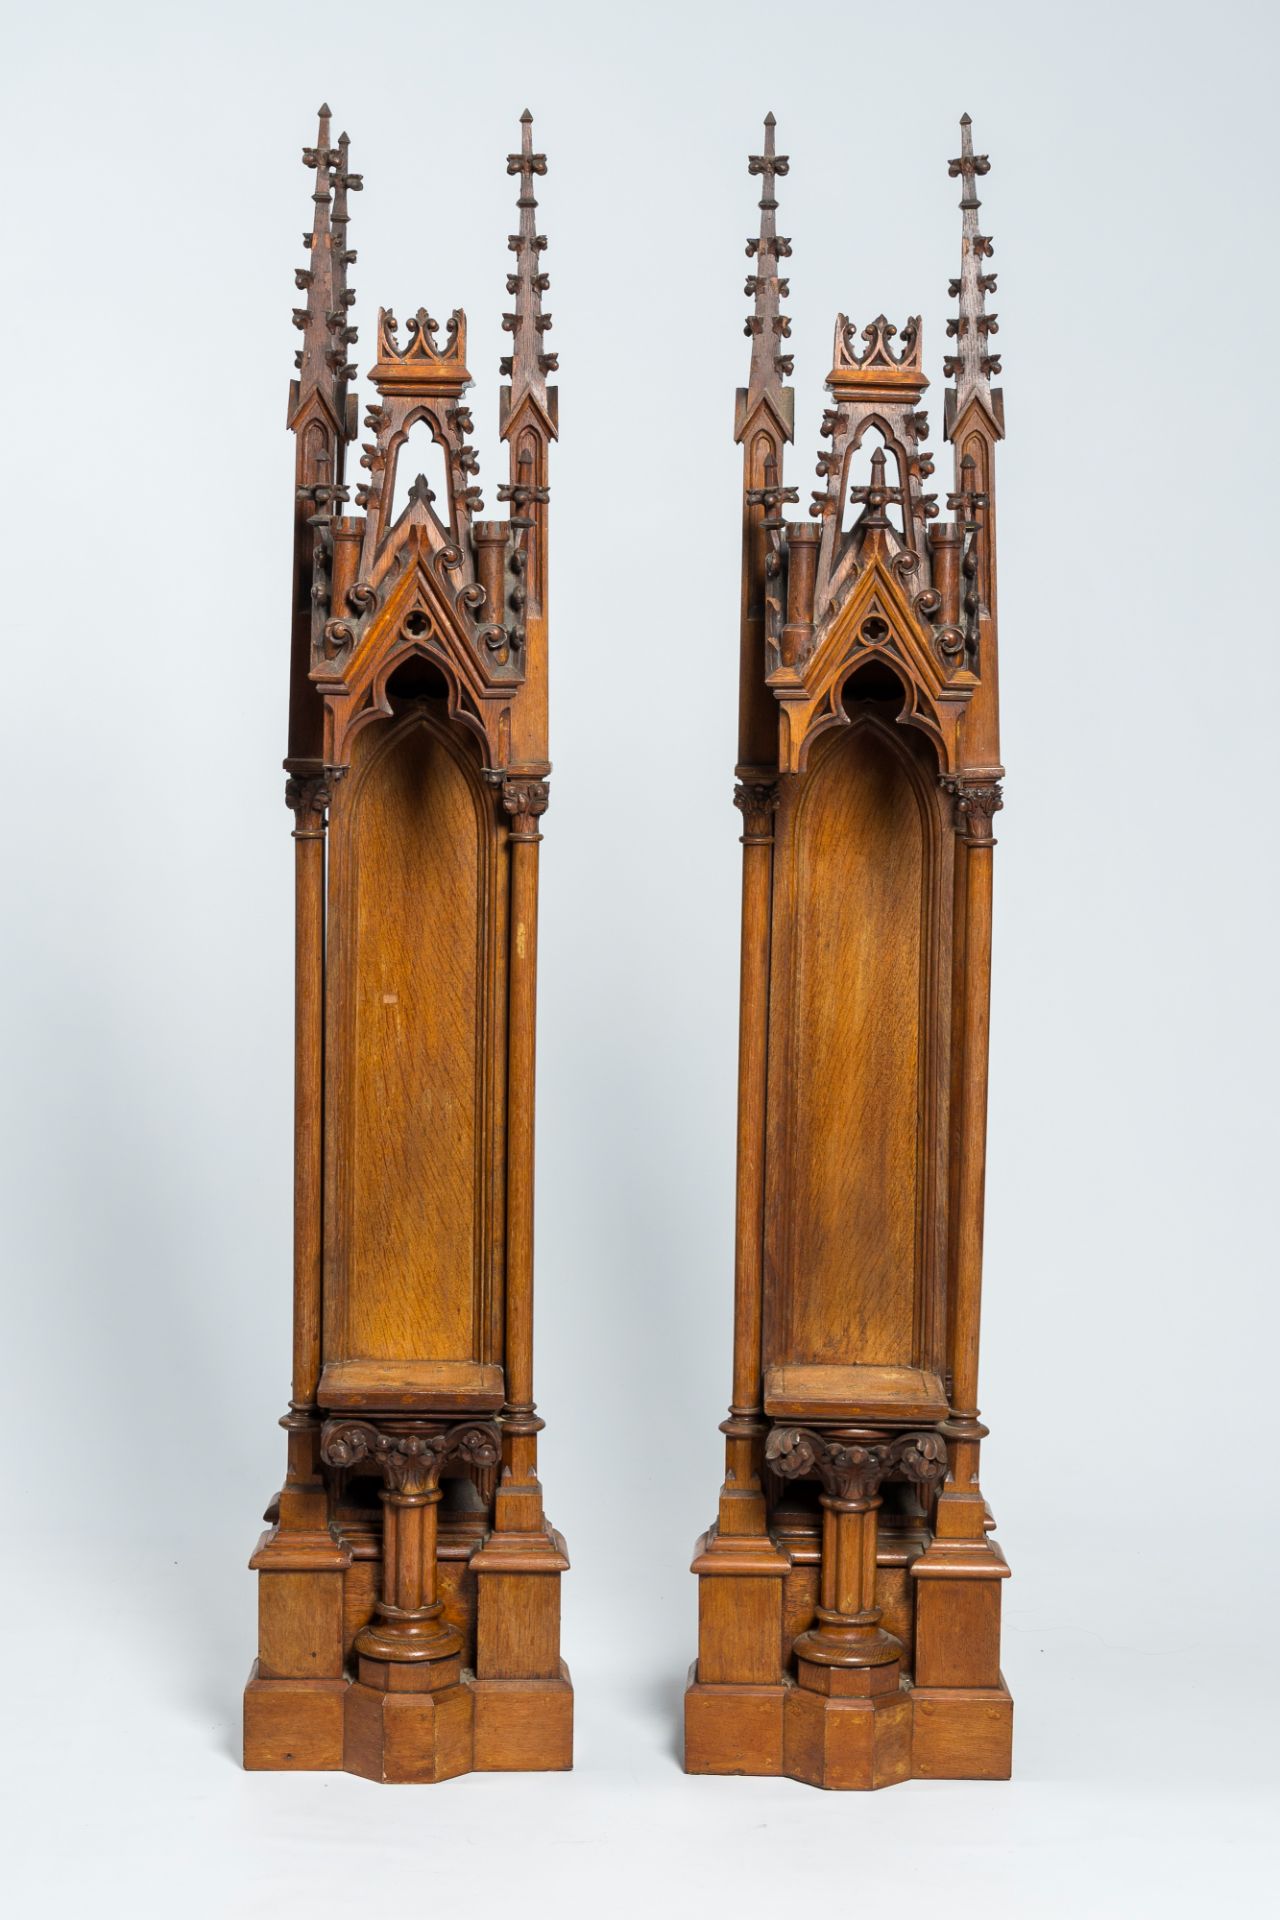 A pair of French Gothic revival oak sculpture niches, late 19th C. - Image 2 of 5